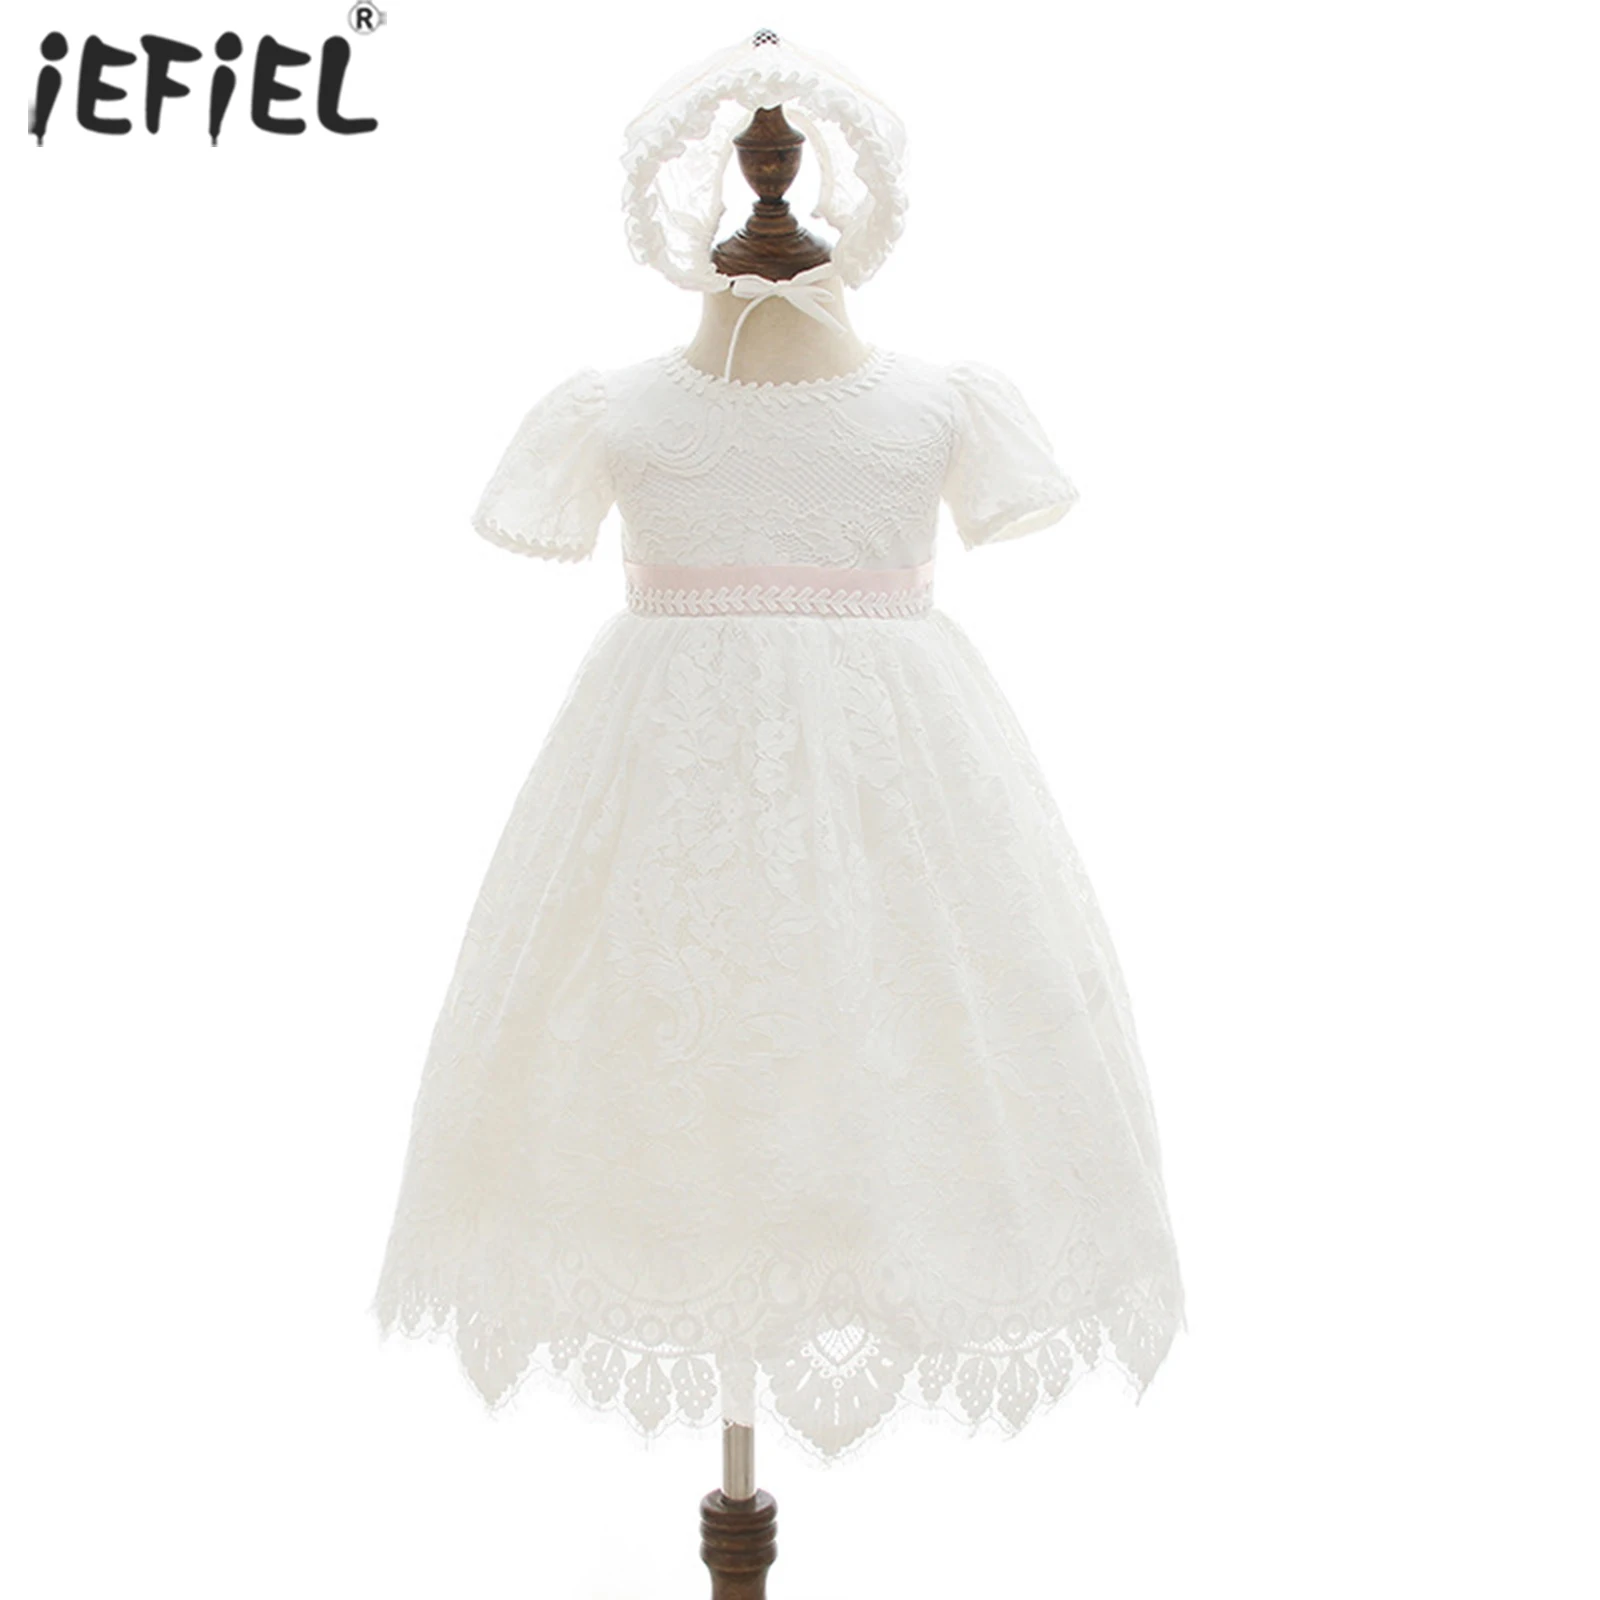 

Newborn Baby Girls One Year Baptism Dresses White Floral Lace 1st First Birthday Party Dress Infants Princess Christening Dress